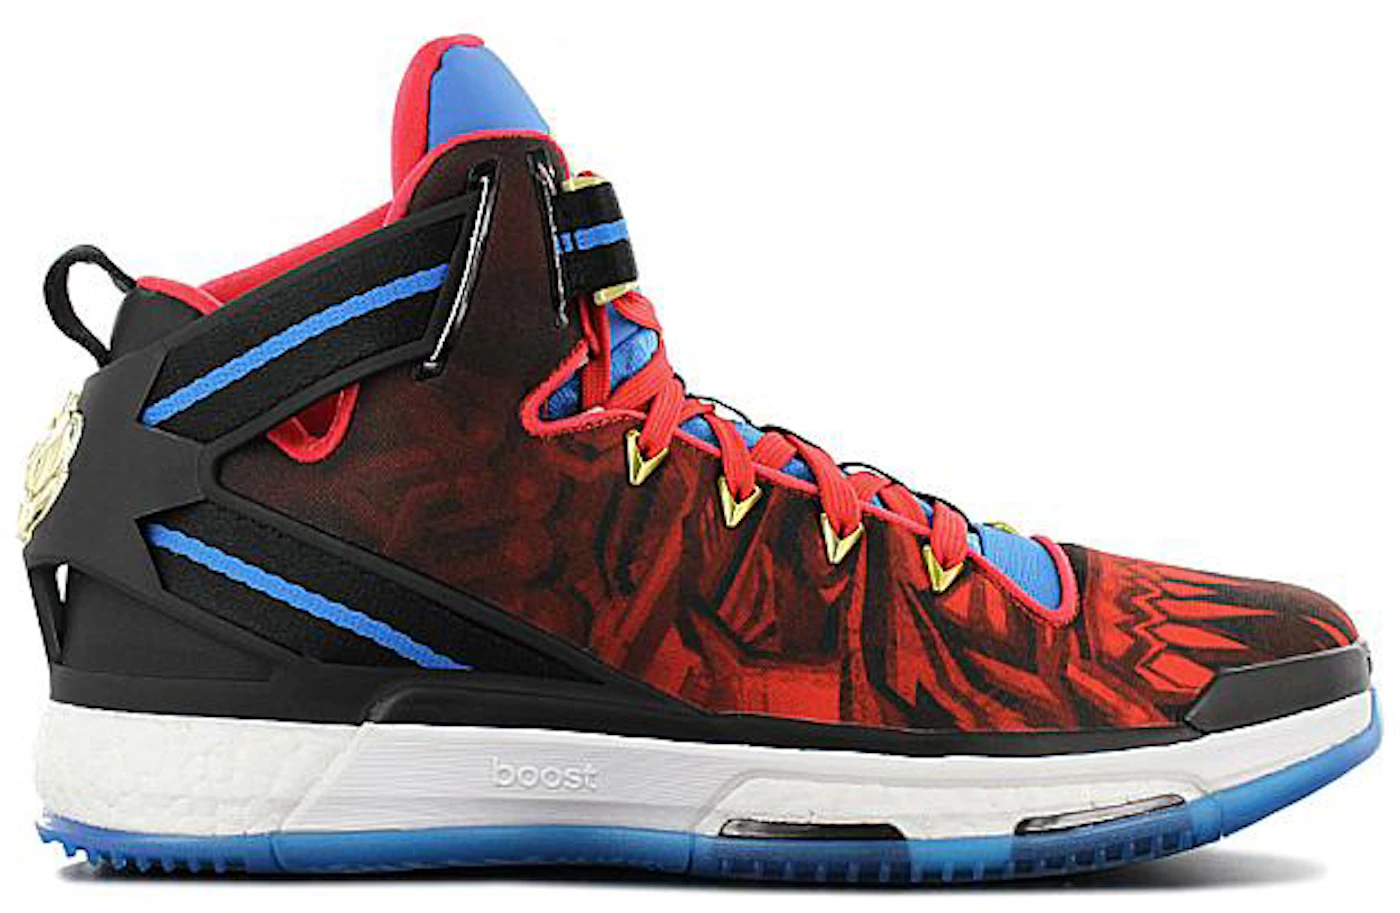 ensillar Perpetuo Equipo adidas D Rose 6 Boost Chinese New Year - F37127 - US